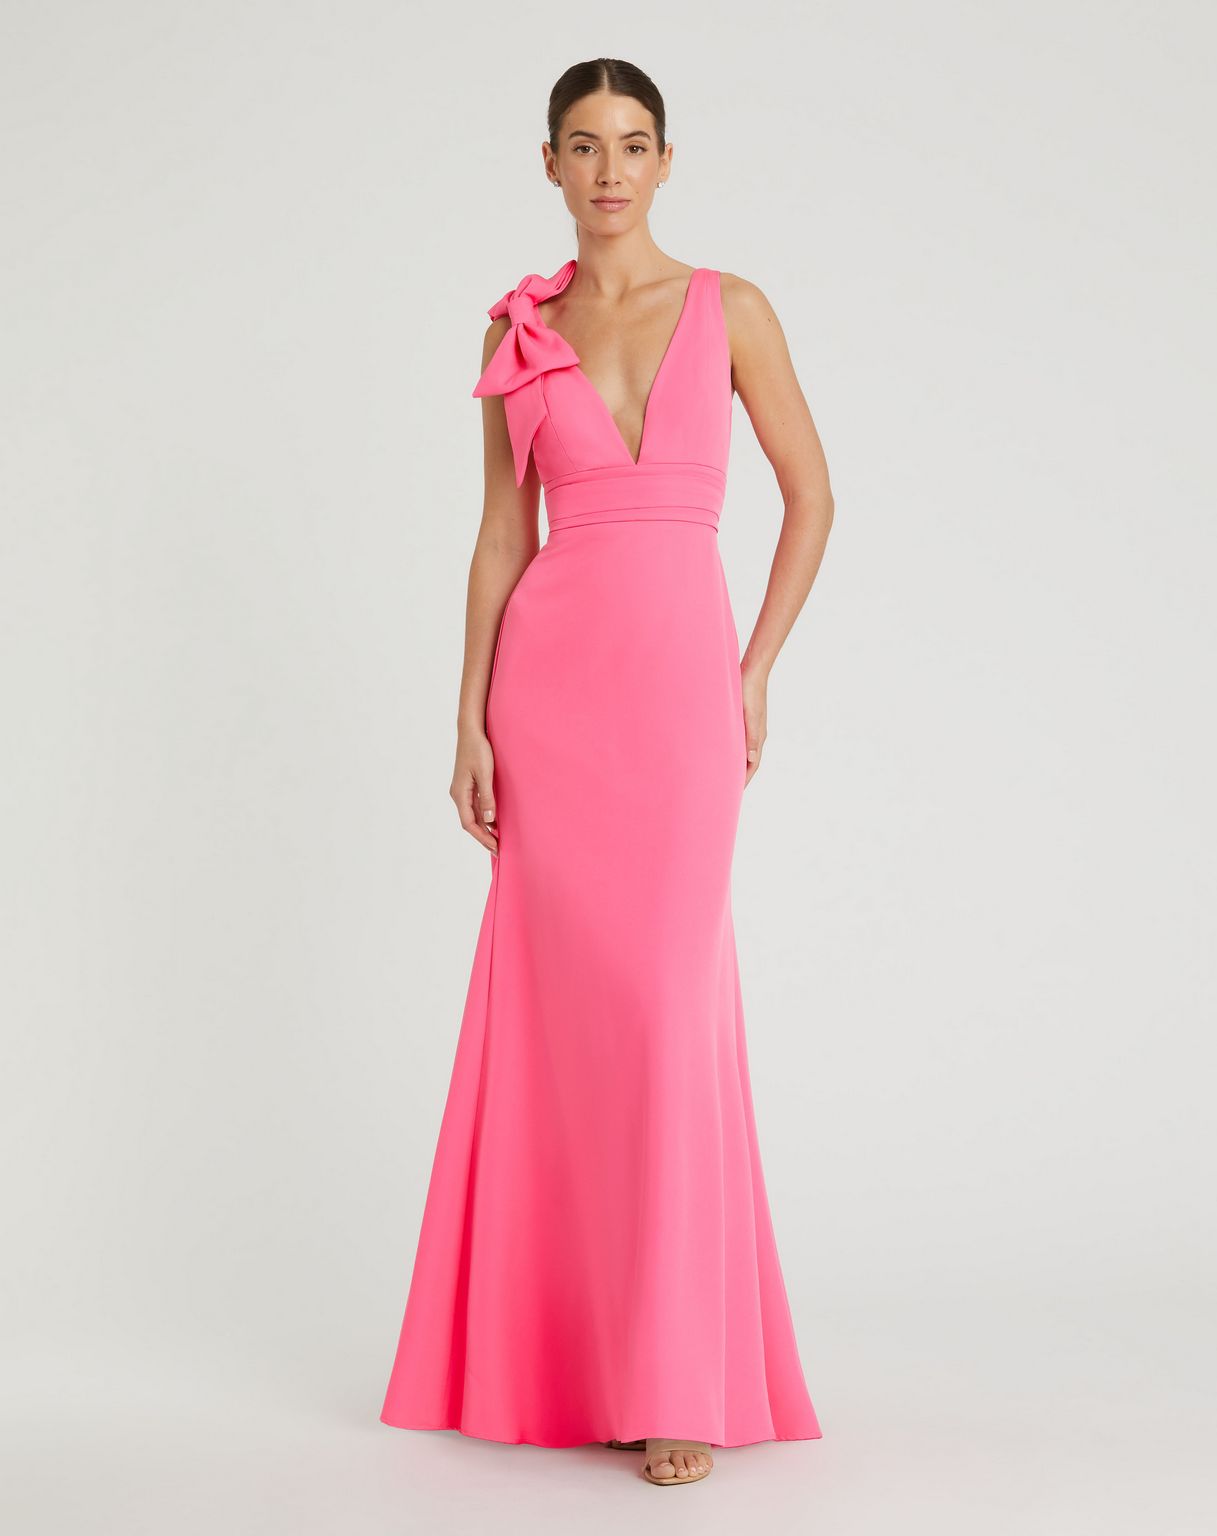 Prom Dresses Long Sleeveless Prom Dress Candy Pink